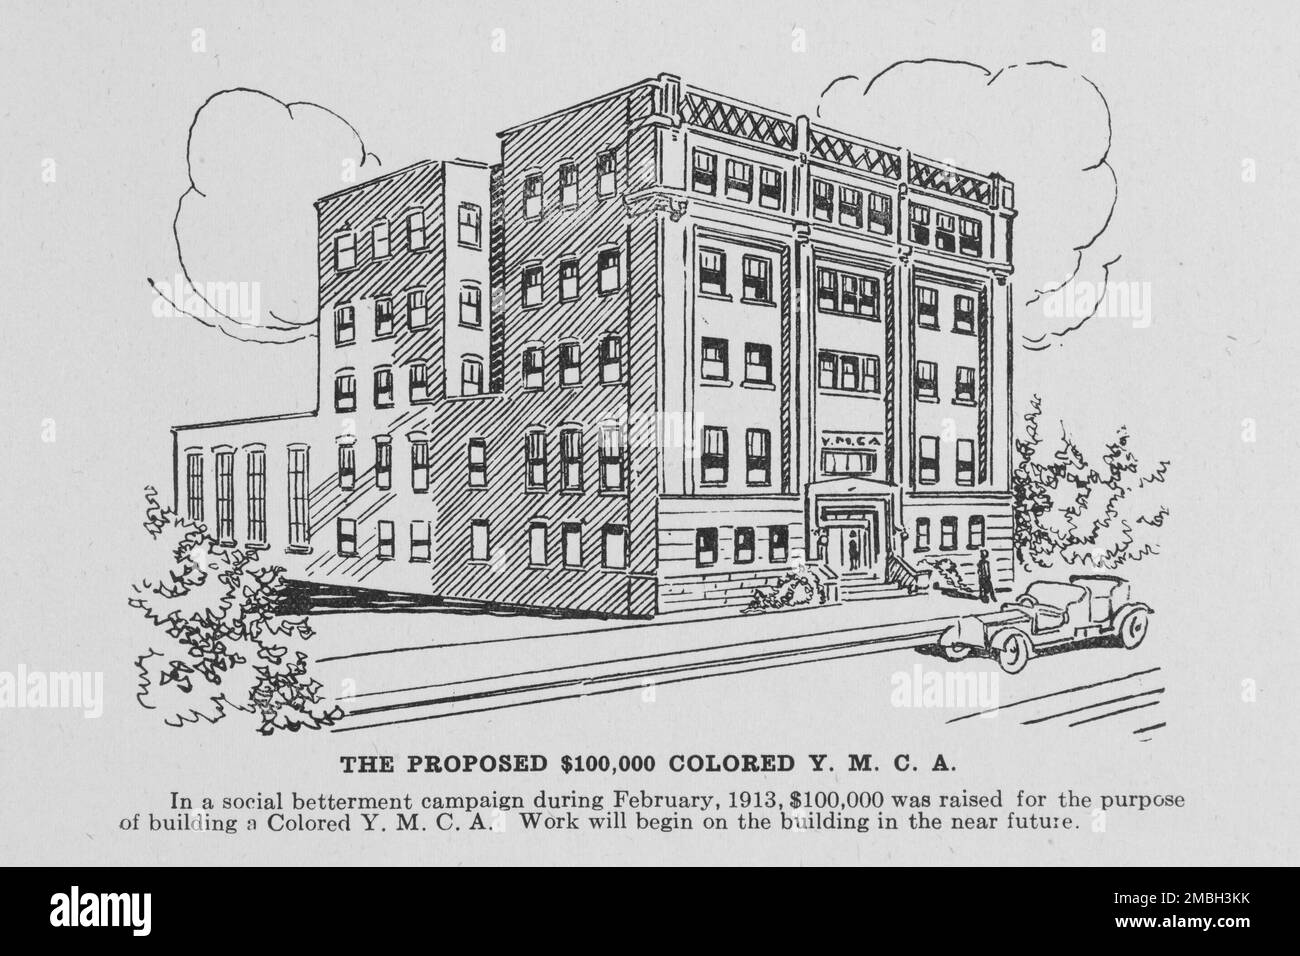 The proposed $ 100,00 Colored Y.M.C.A; In a social betterment campaign during February, 1913 $100,000 was raised for the purpose of building a Colored Y.M.C.A.; Work will begin on the building in the near future, 1913. Stock Photo